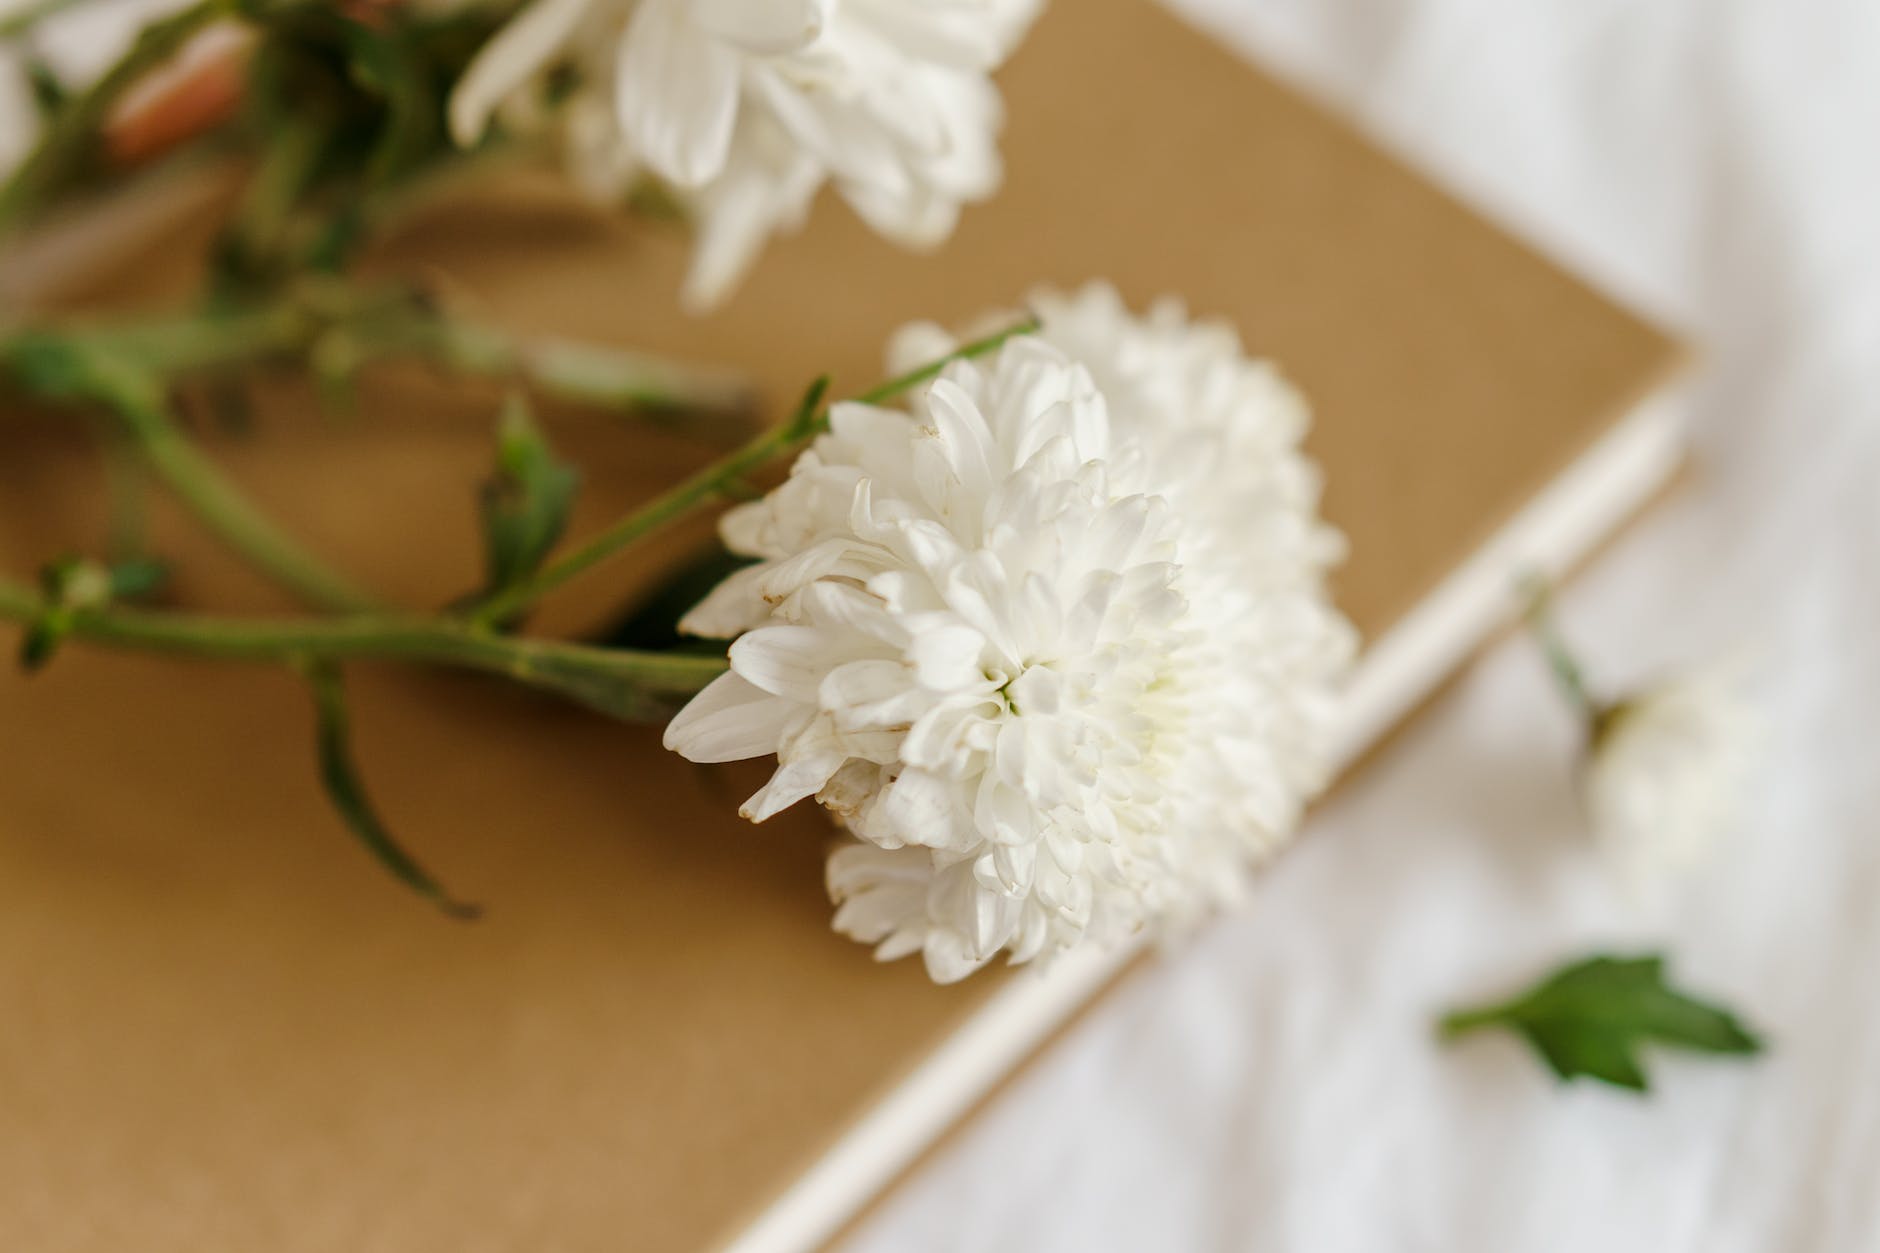 fresh chrysanthemums with delicate petals on book